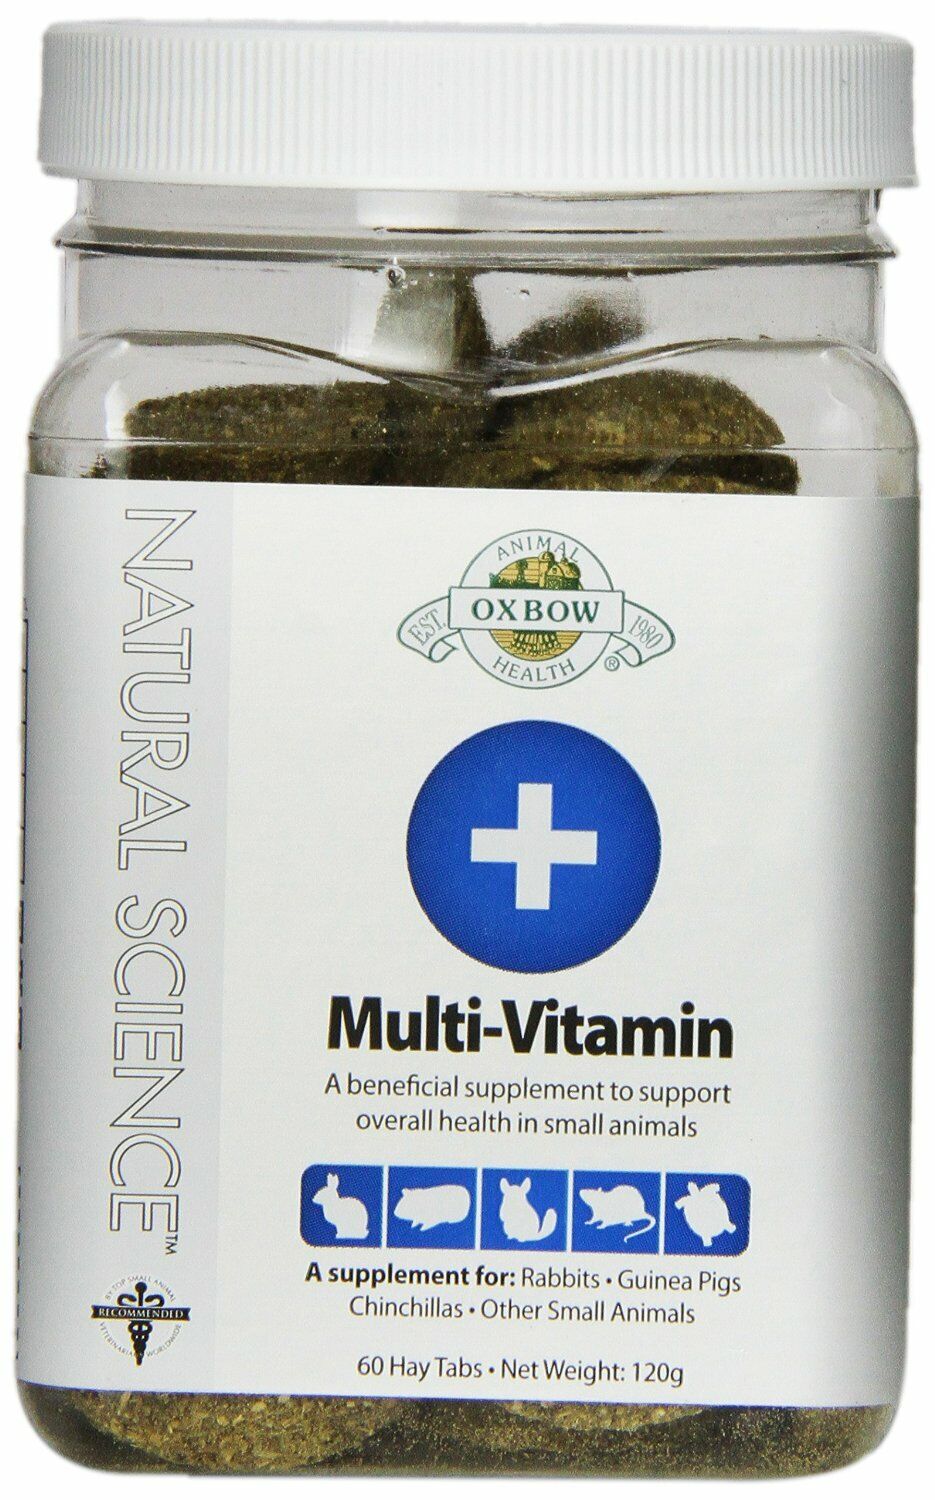 Oxbow Natural Science Multi-vitamin Helps Overall Health In Small Animals 4.2-oz